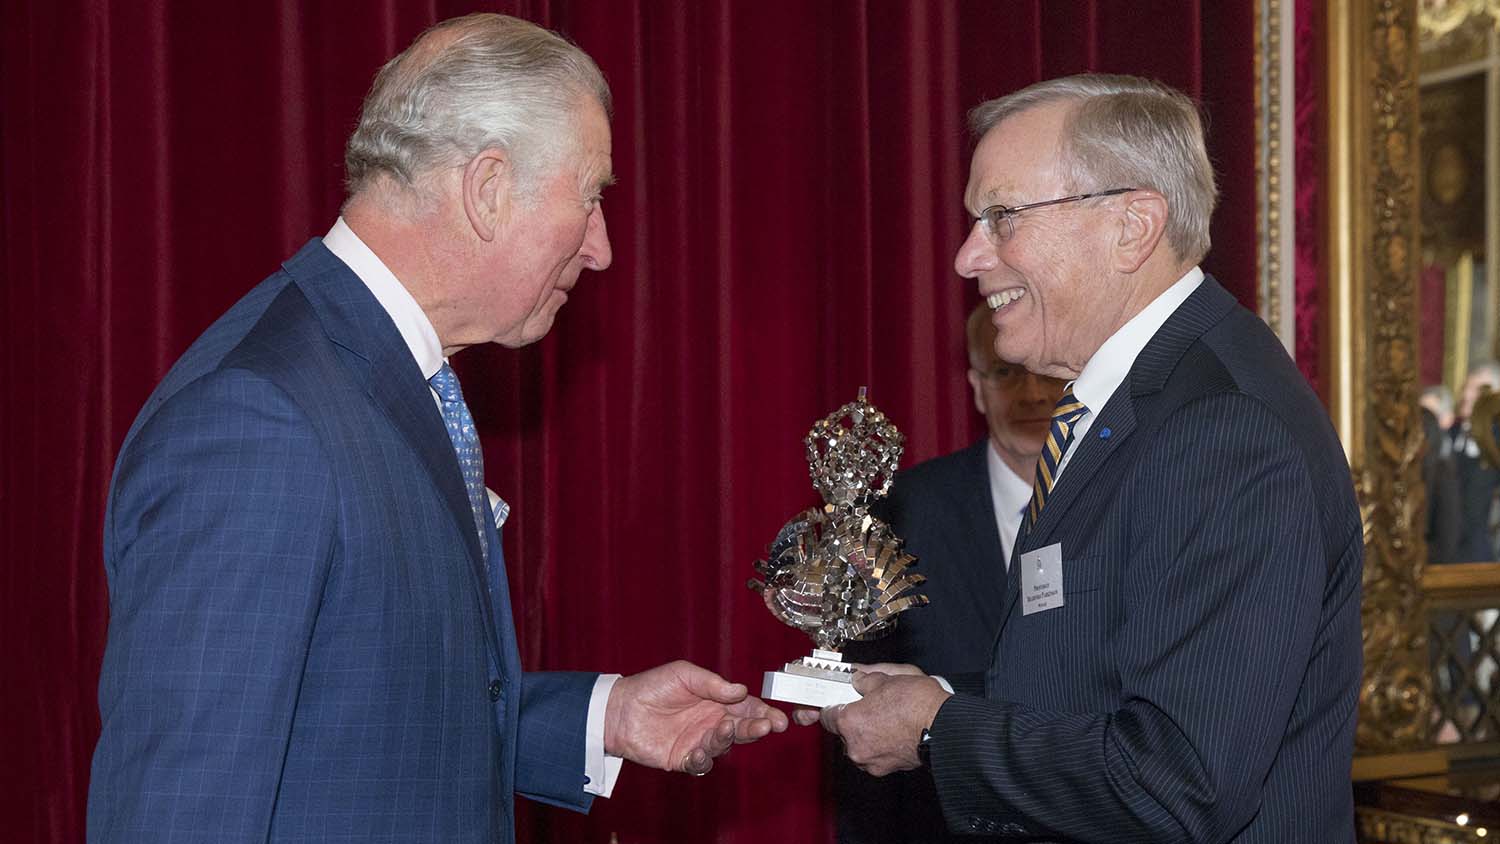 2019 QEPrize trophy presented by HRH The Prince of Wales to Dr Bradford Parkinson